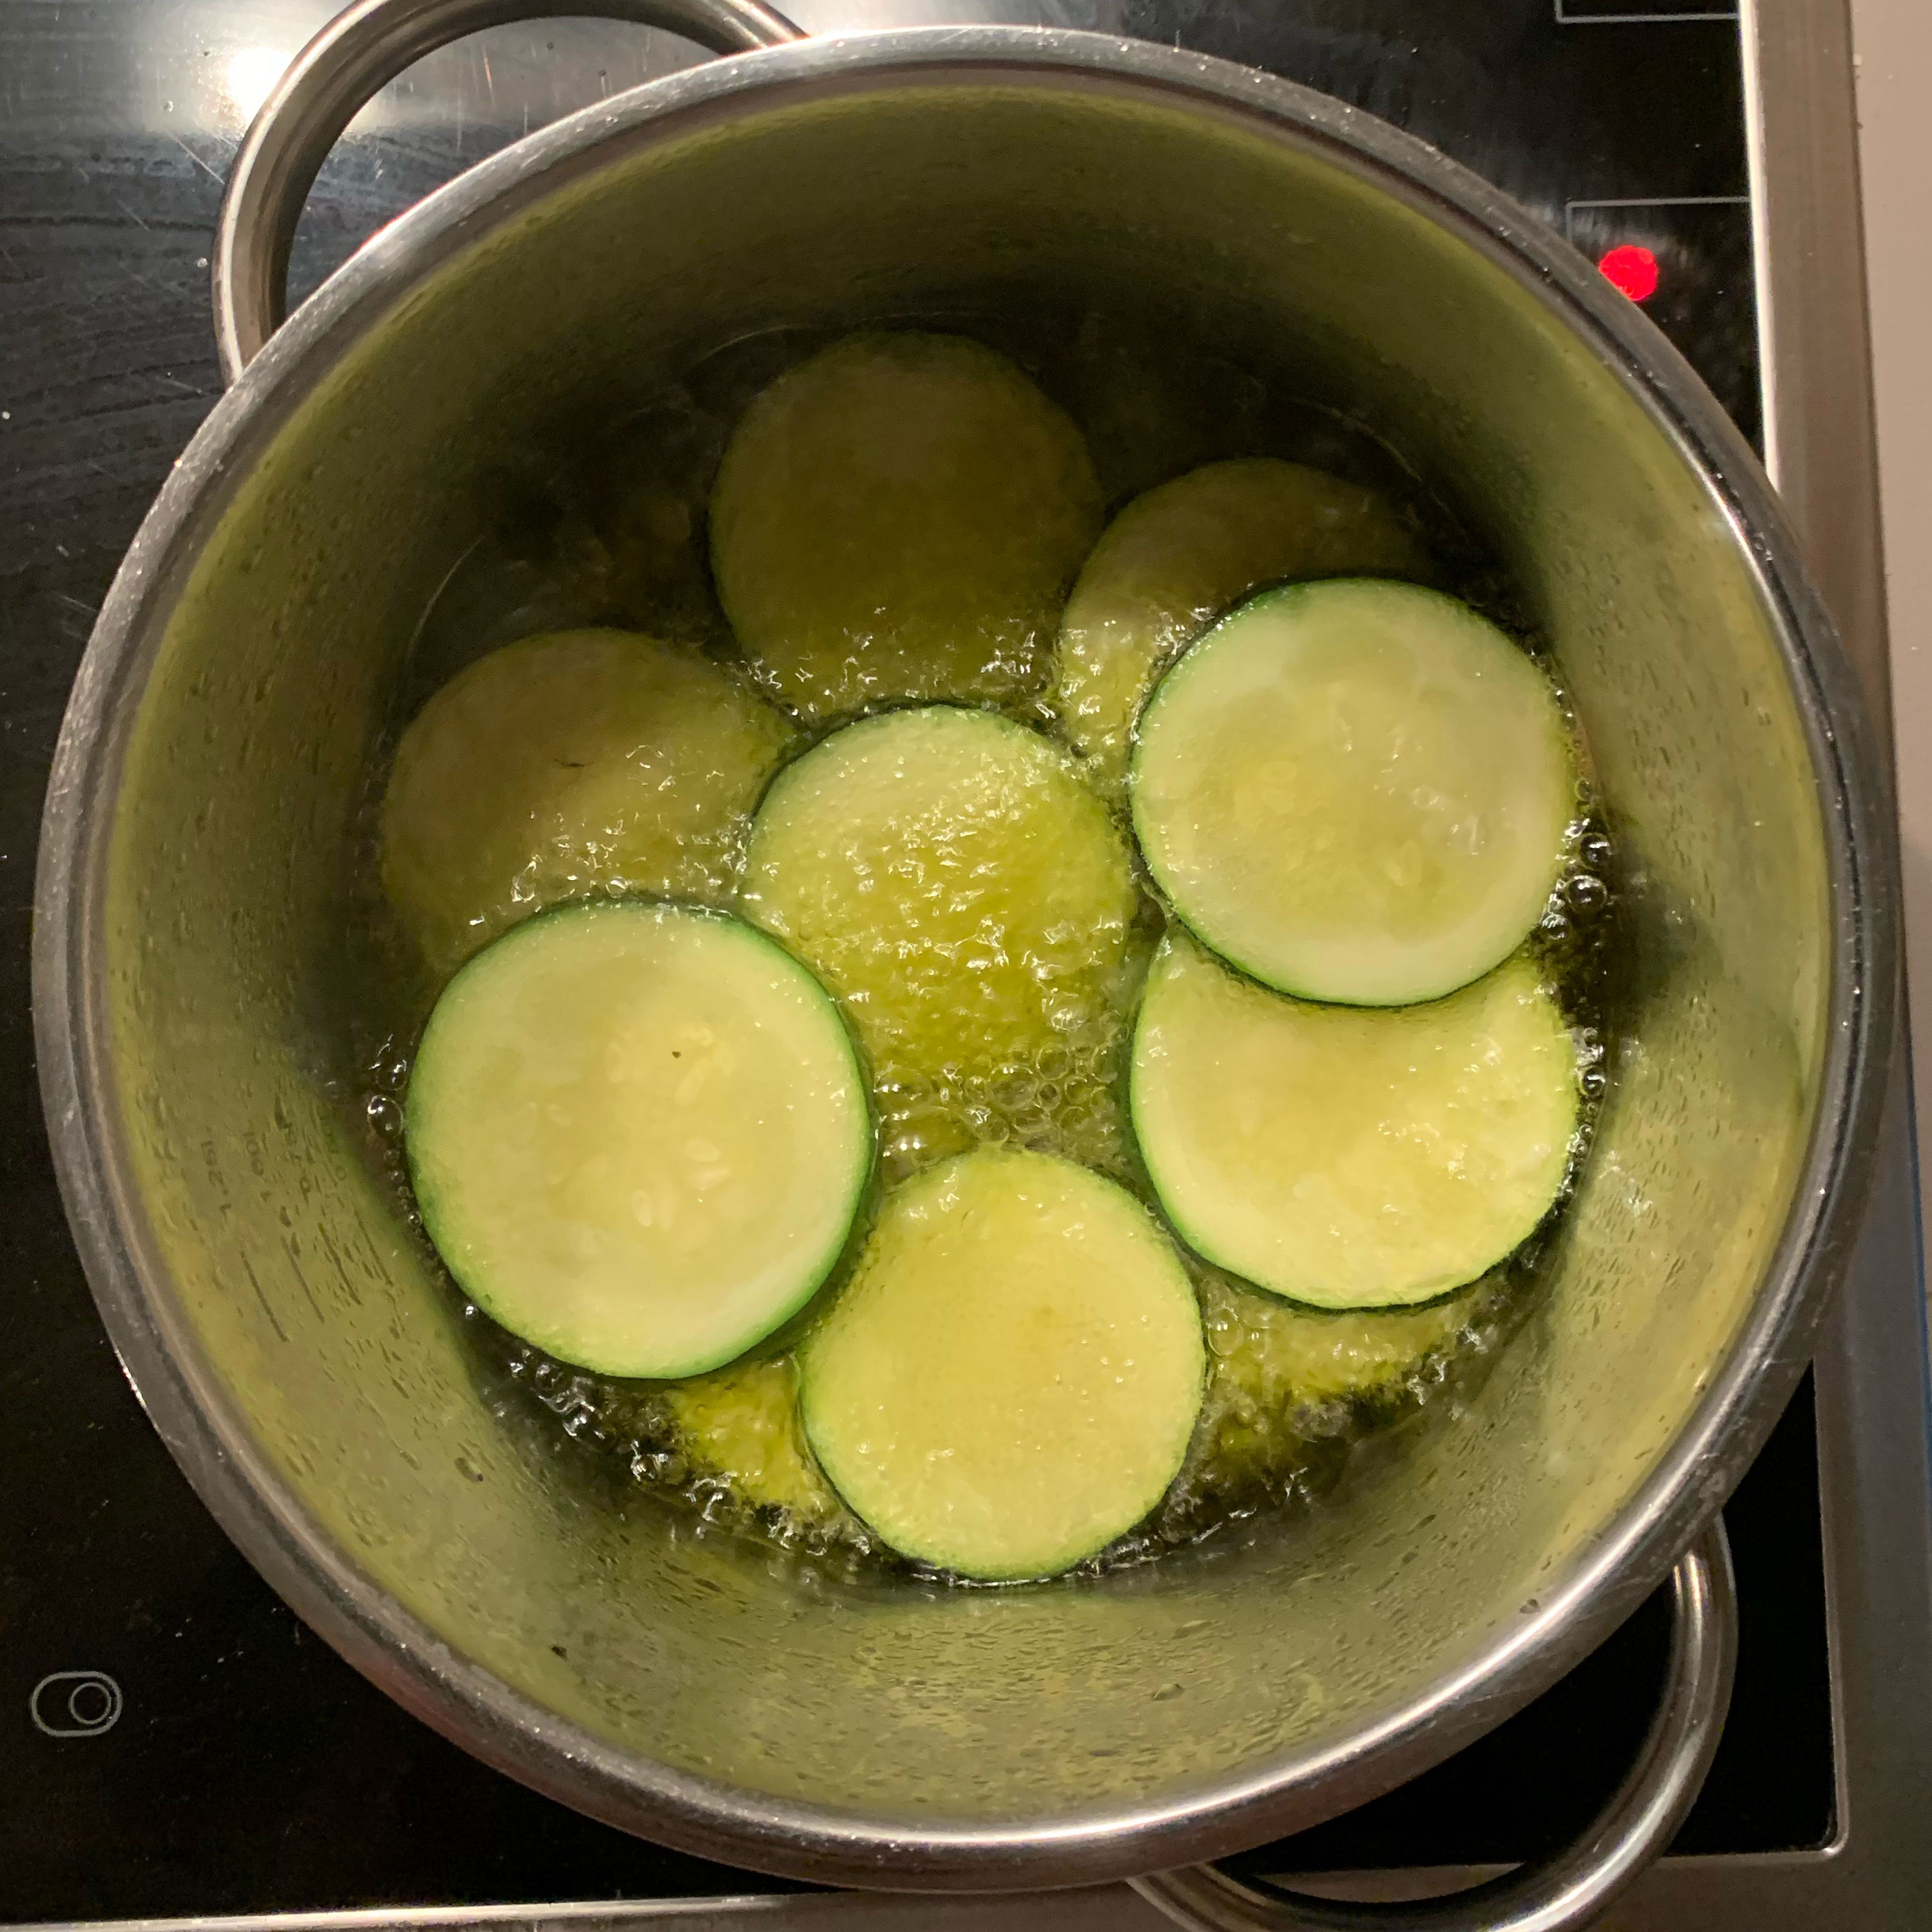 Wash and slice the zucchini, then add them to a pot with abundant and already hot oil for frying. Fry the zucchini until golden, it will take aprox. 10 minutes.